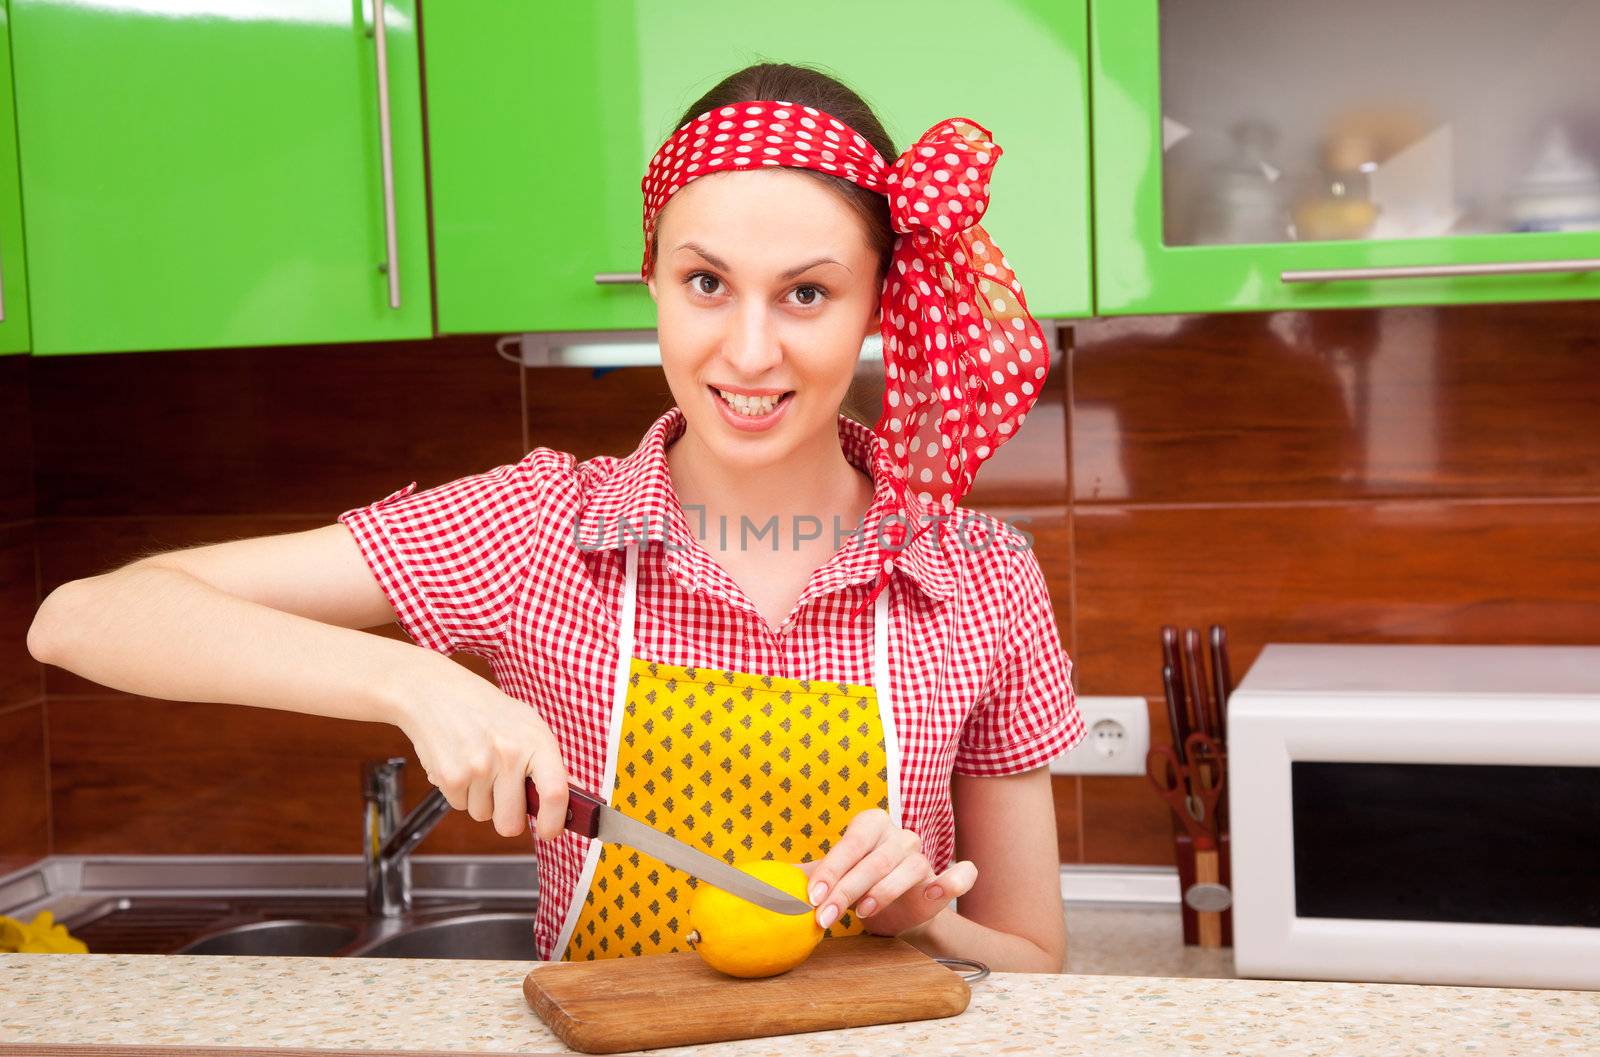 Woman in the kitchen is cutting a fresh lemon